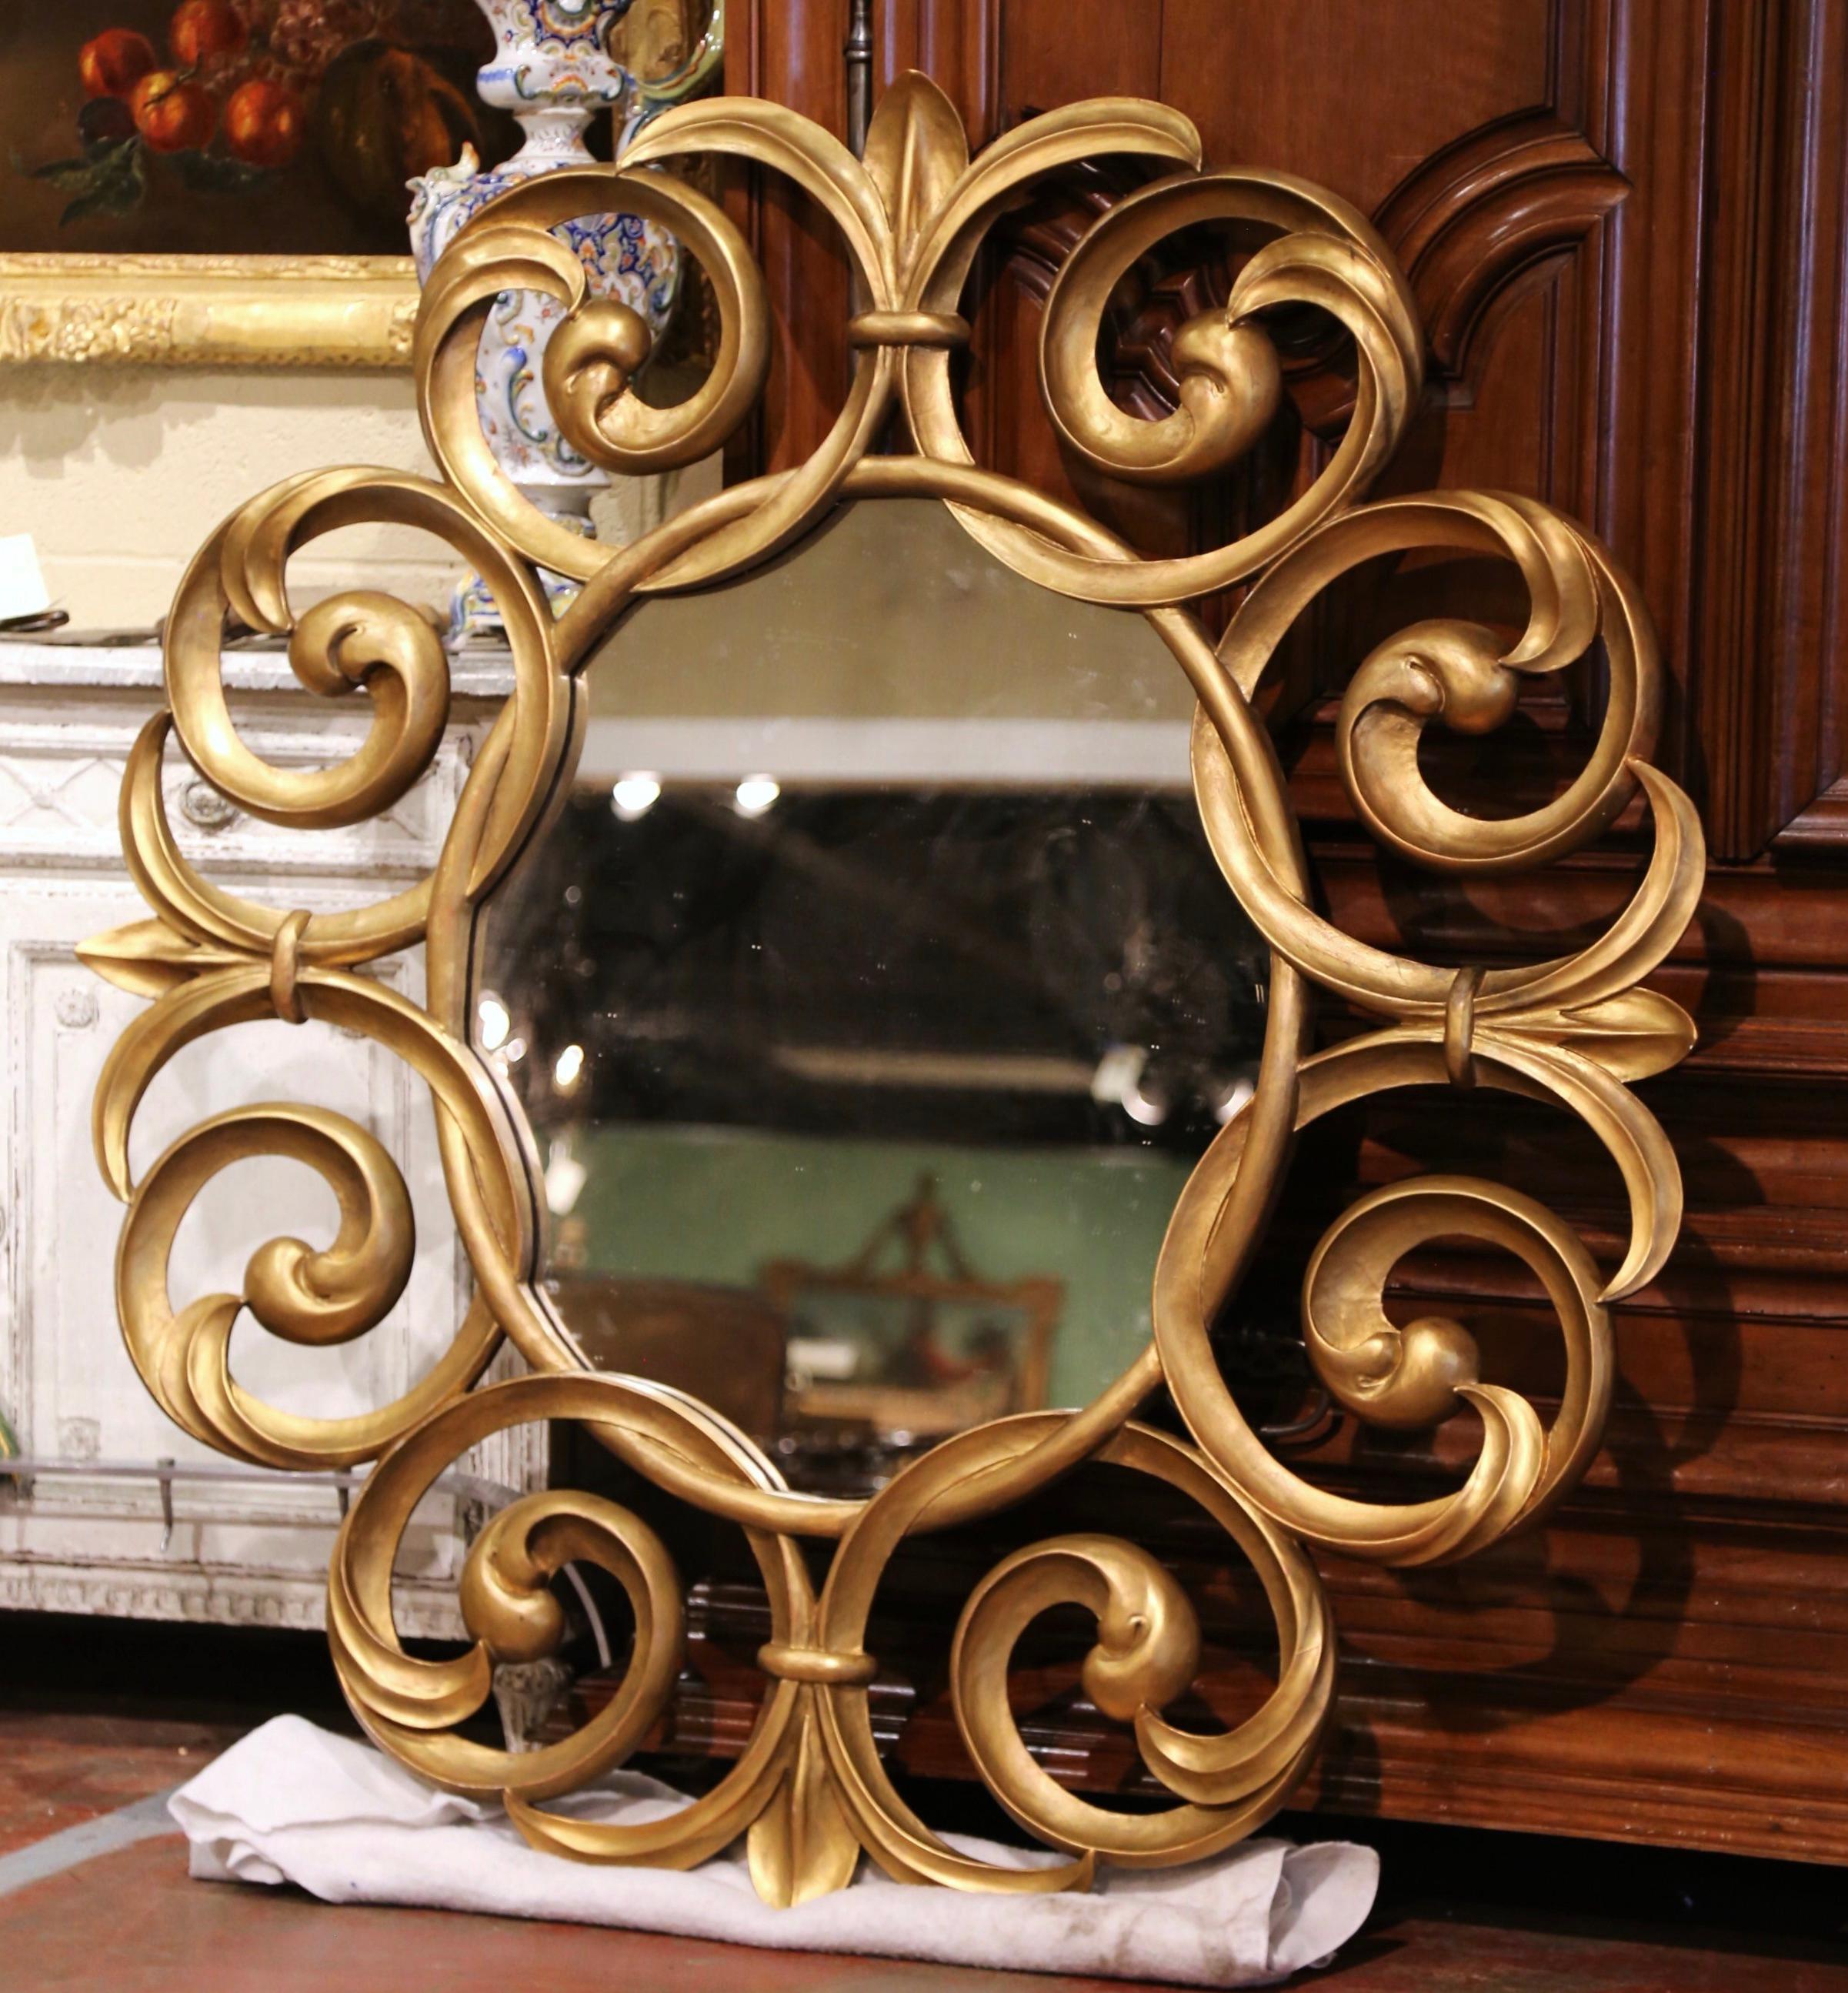 This important antique sunburst mirror was crafted in France, circa 1920. Almost 5 feet high and circular in shape, the large mirror features hand carved scroll and Fleur-de-Lys motifs in high relief throughout. The wall decor is dressed with a